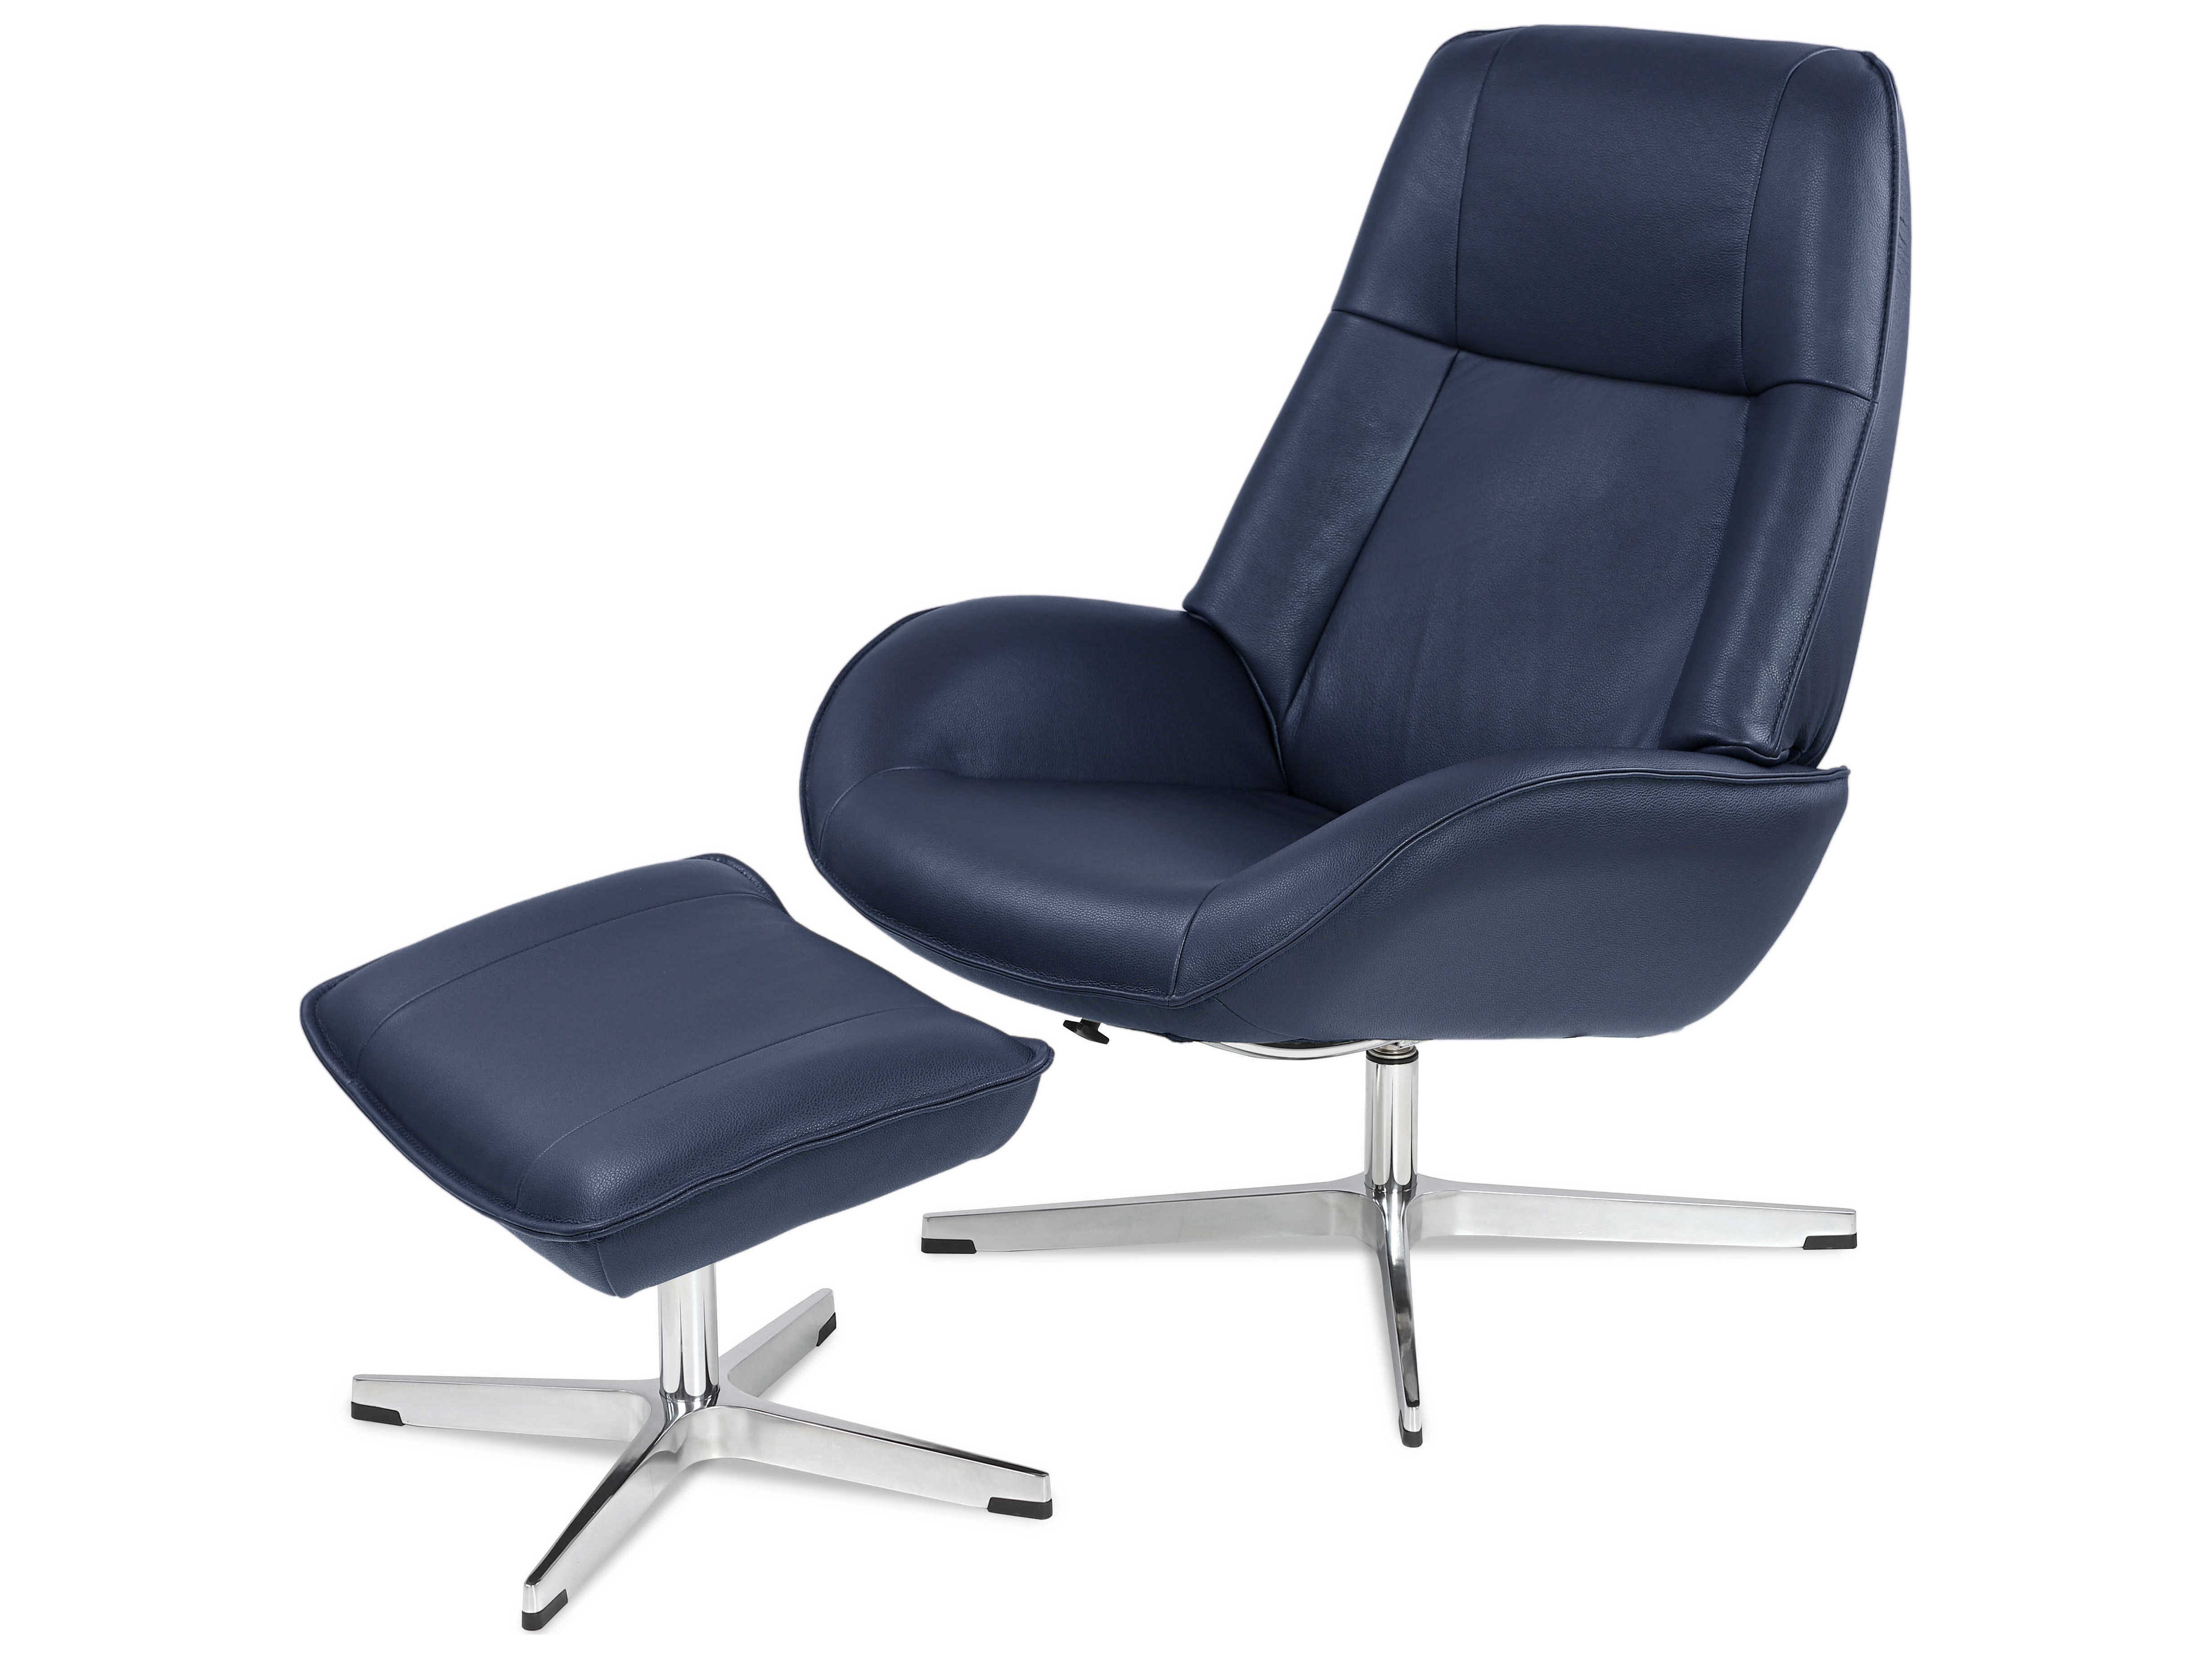 Kebe Roma Balder Blue Leather Recliner, Navy Leather Recliner